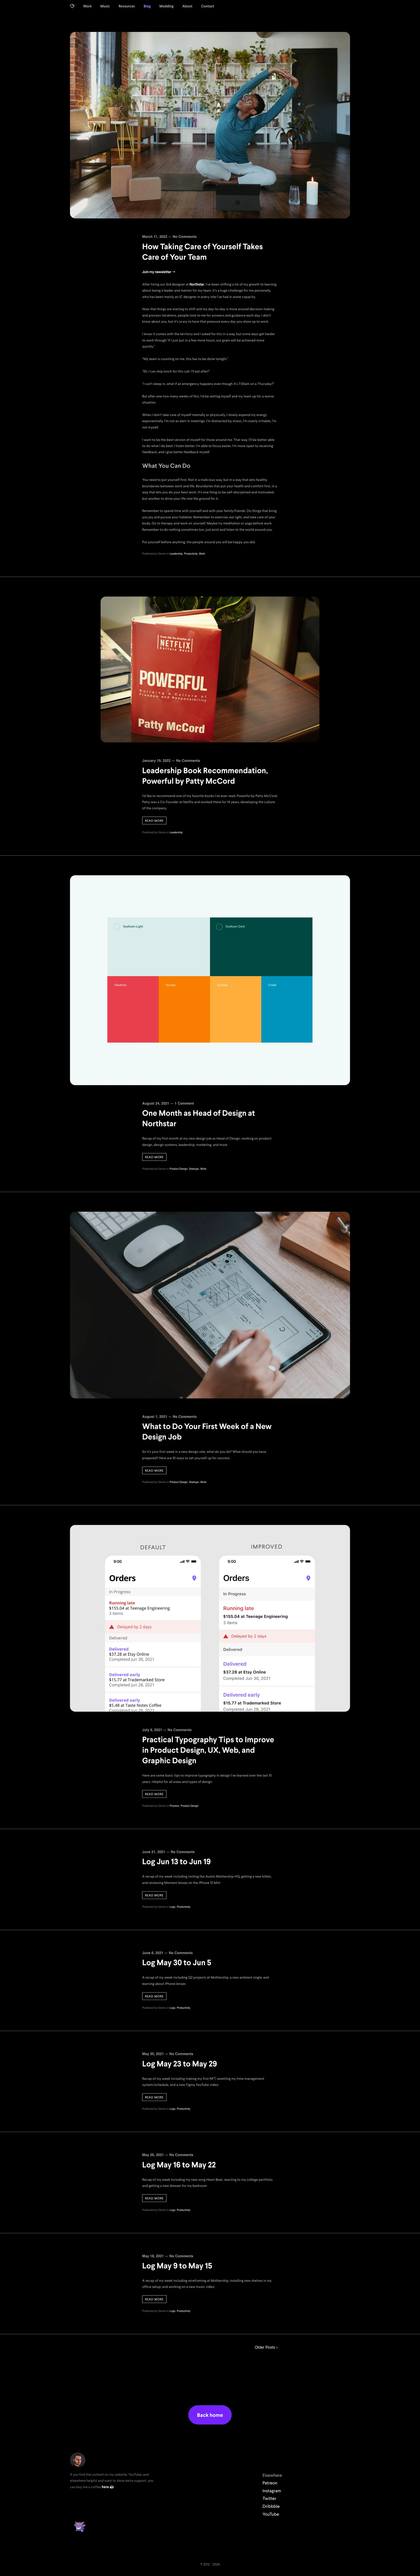 Dennis Cortés Landing Page Example: Dennis is a designer with 10 years of experience in building design teams and products used by millions of people (Uber, Facebook, Dave, KW). Available for design advising and product validation services.